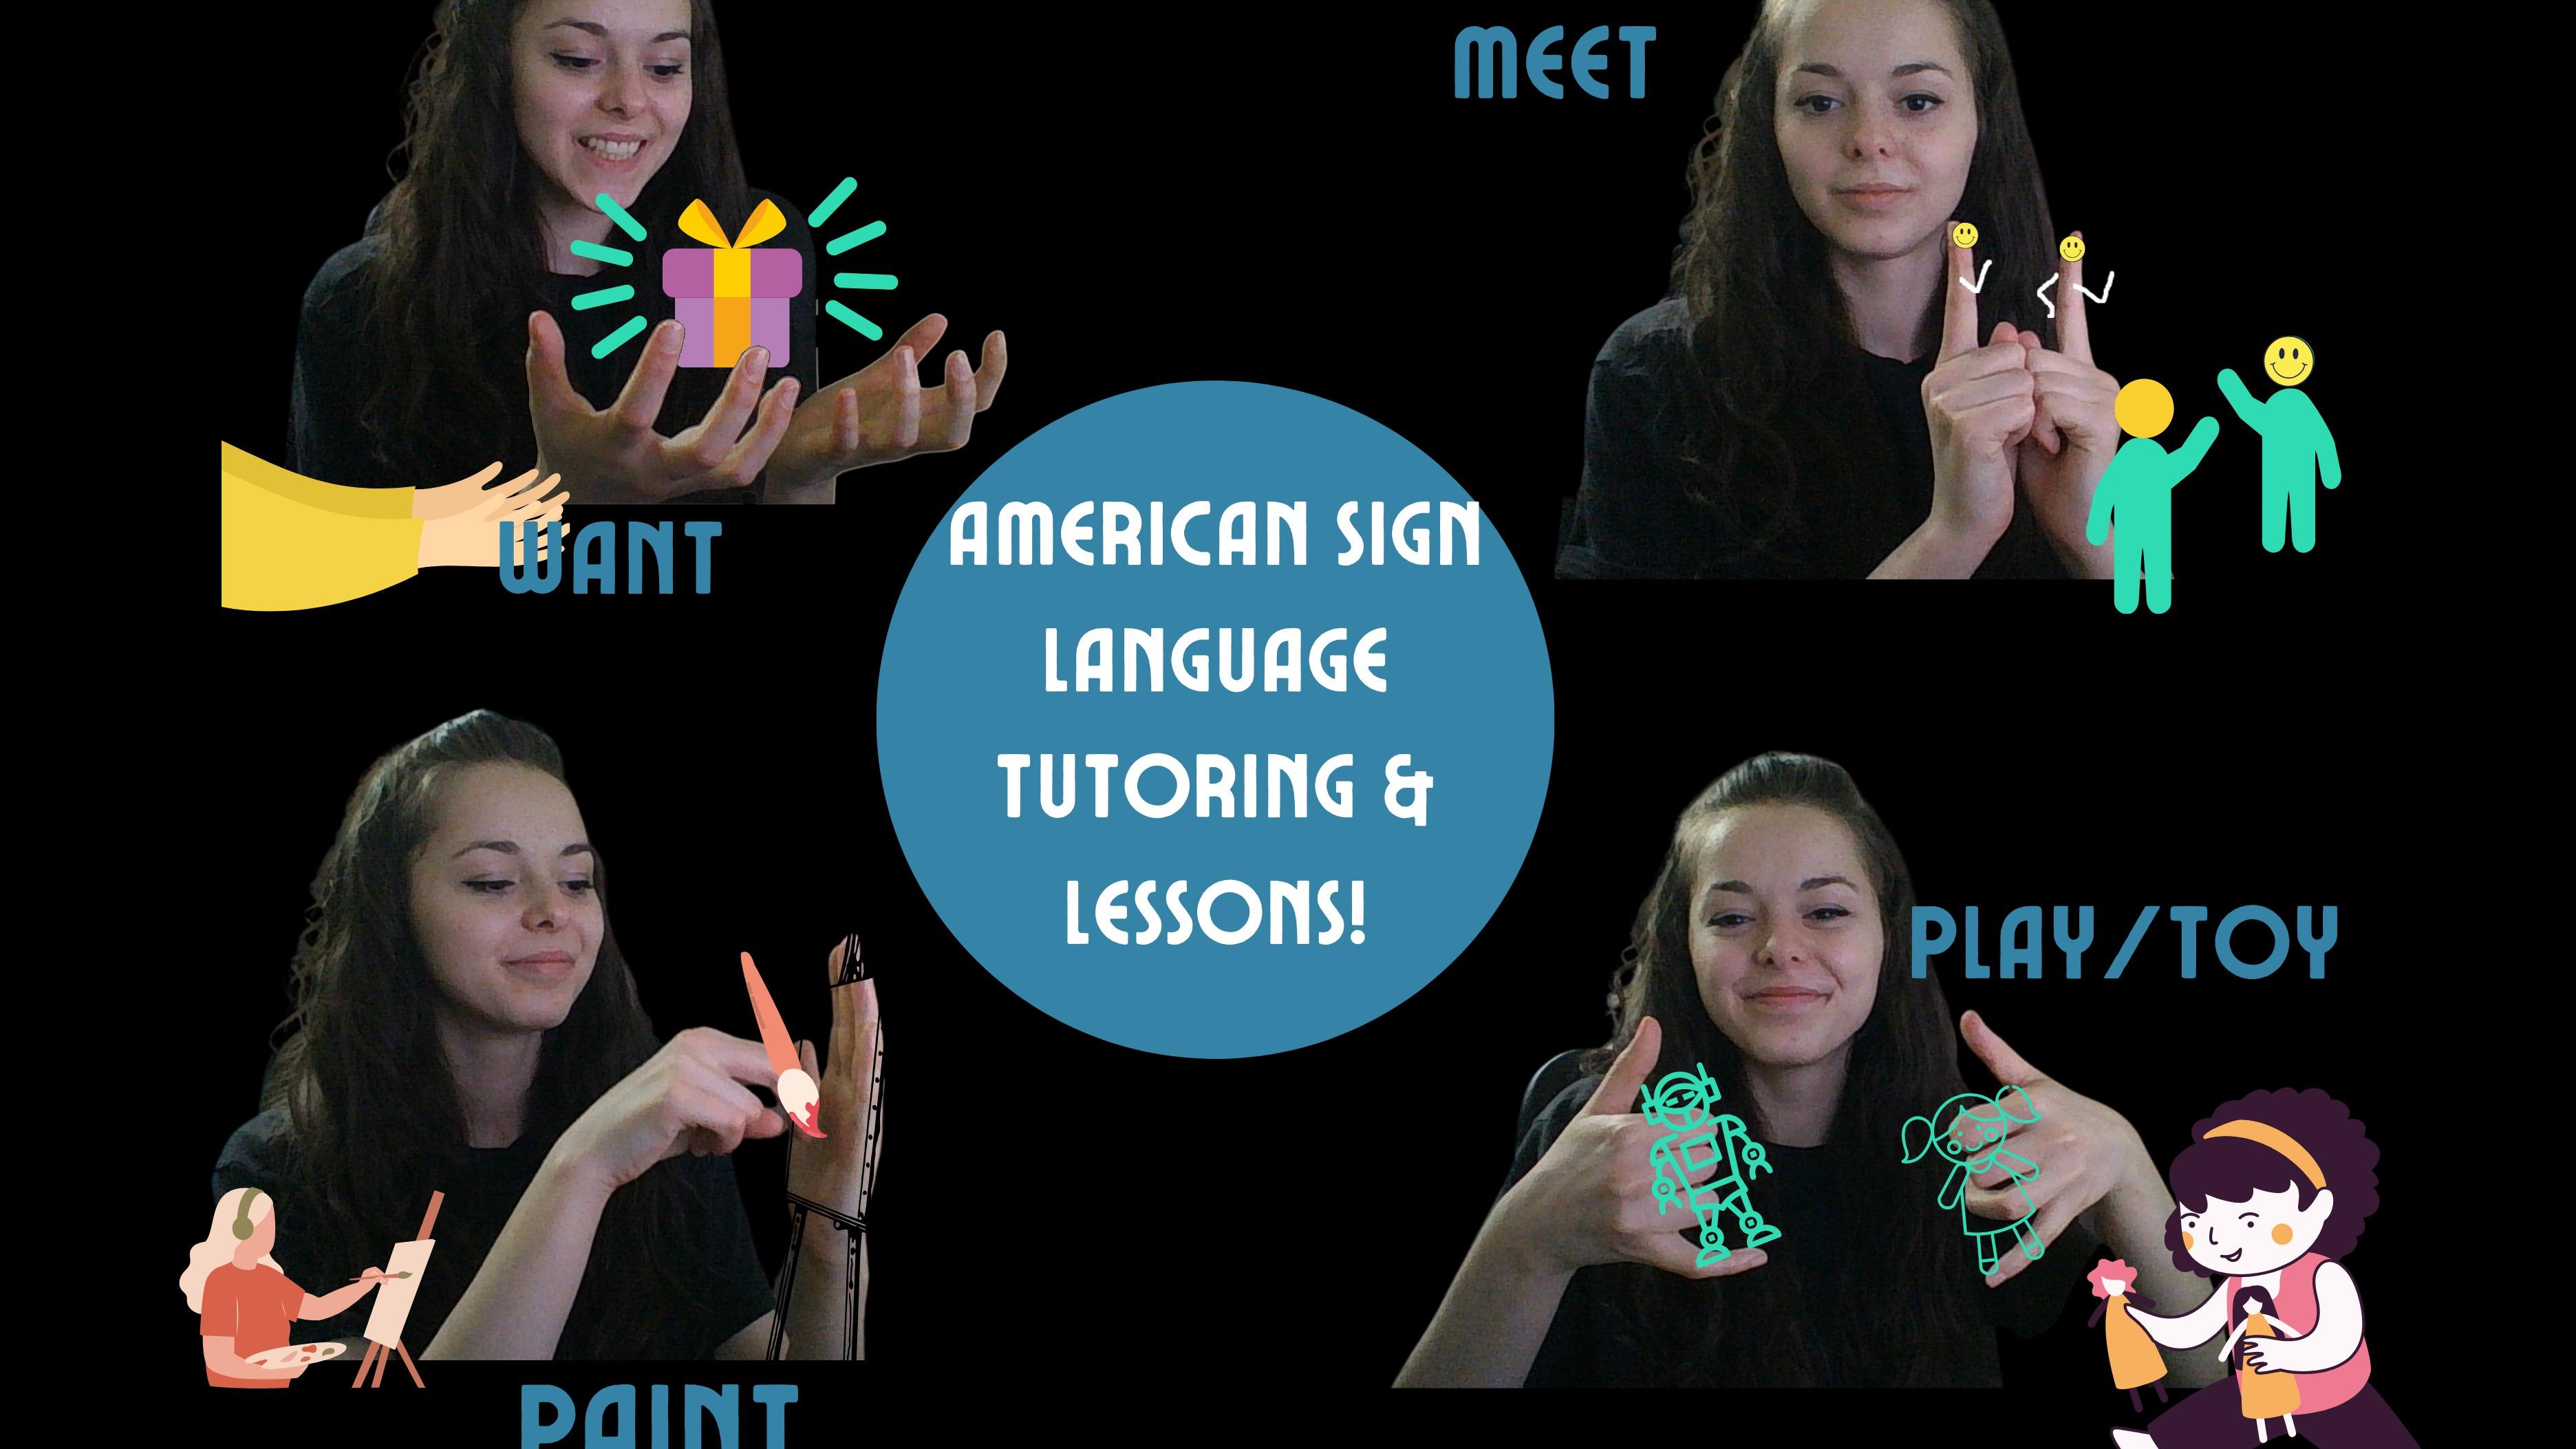 Welcome! Do you need an ASL Tutor or Want Lessons?